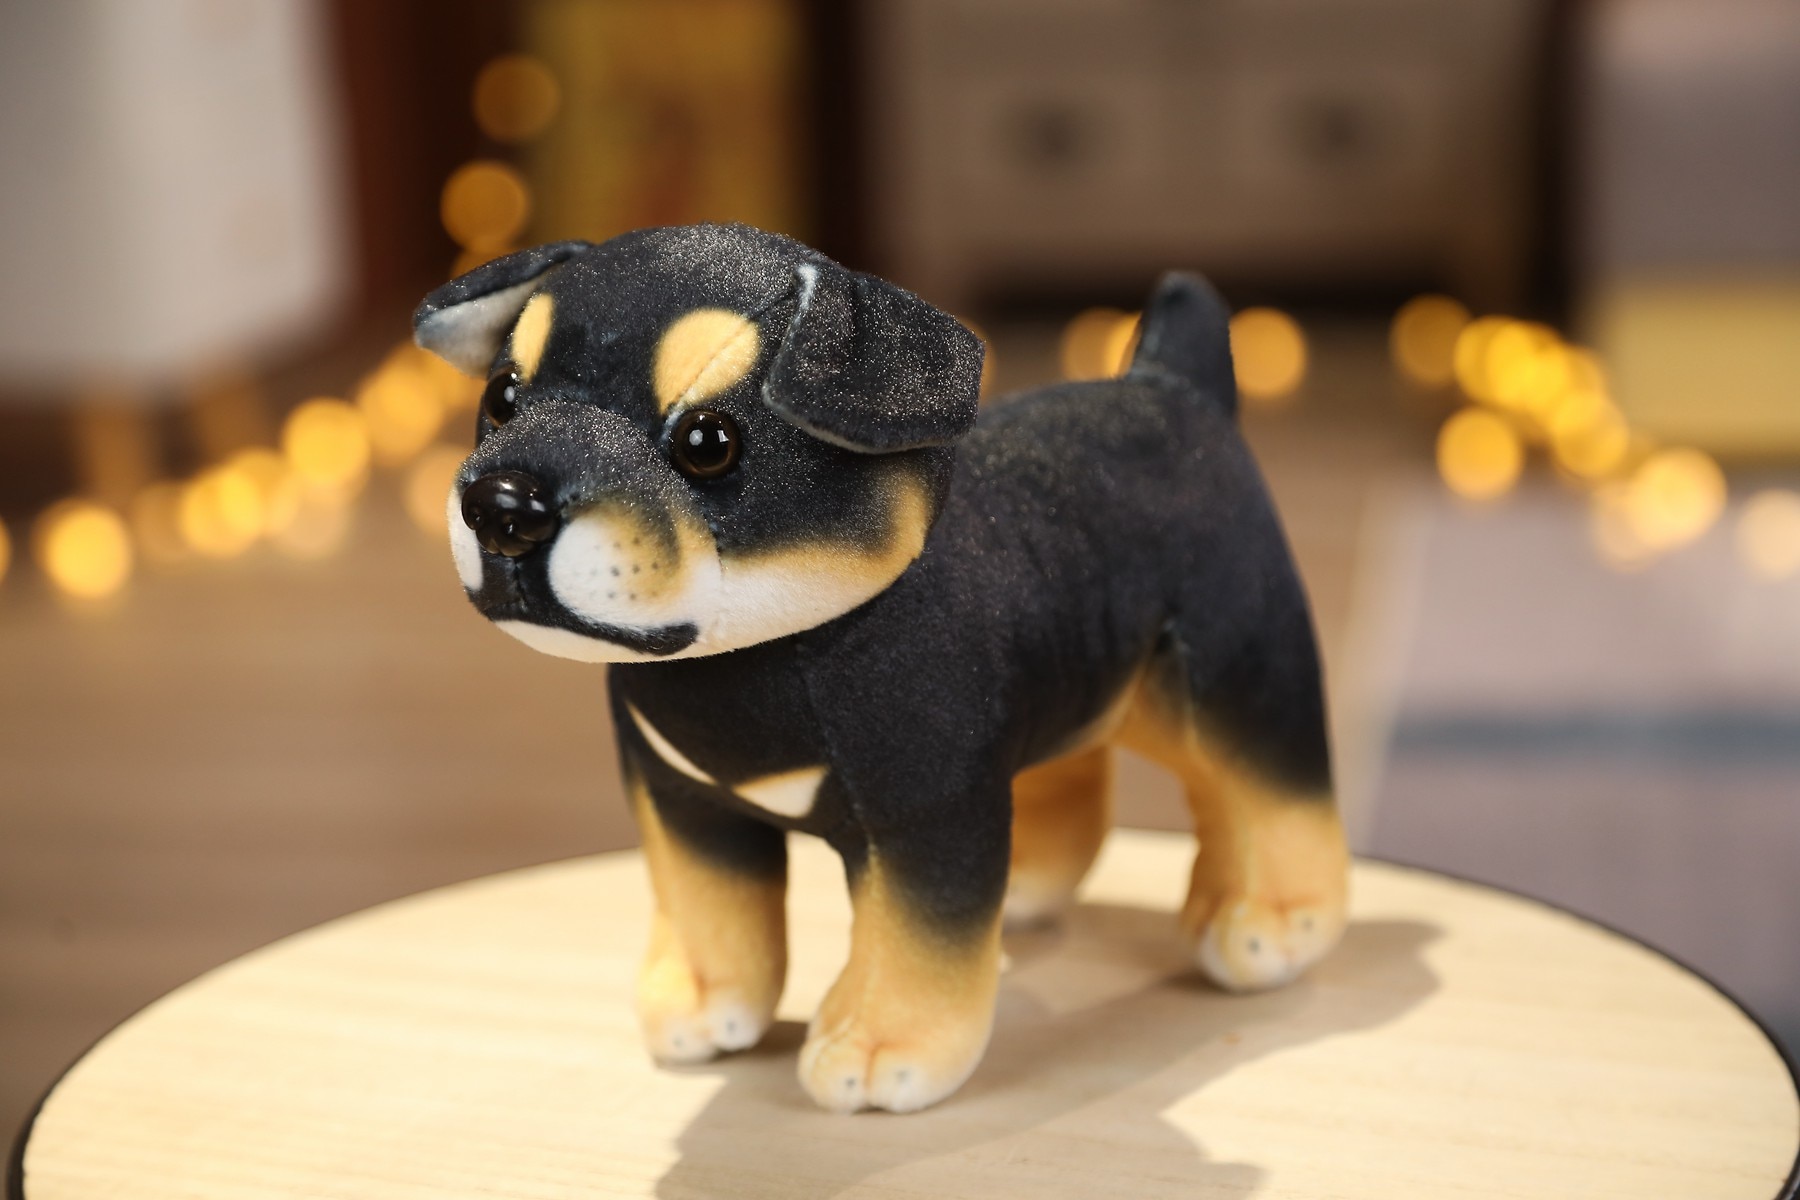 Real Life Standing Dog Stuffed Plush Toy Cute Dalmatian Beagle Rottweiler Husky Soft Plush Animal Toy Home Decor For Baby Gift